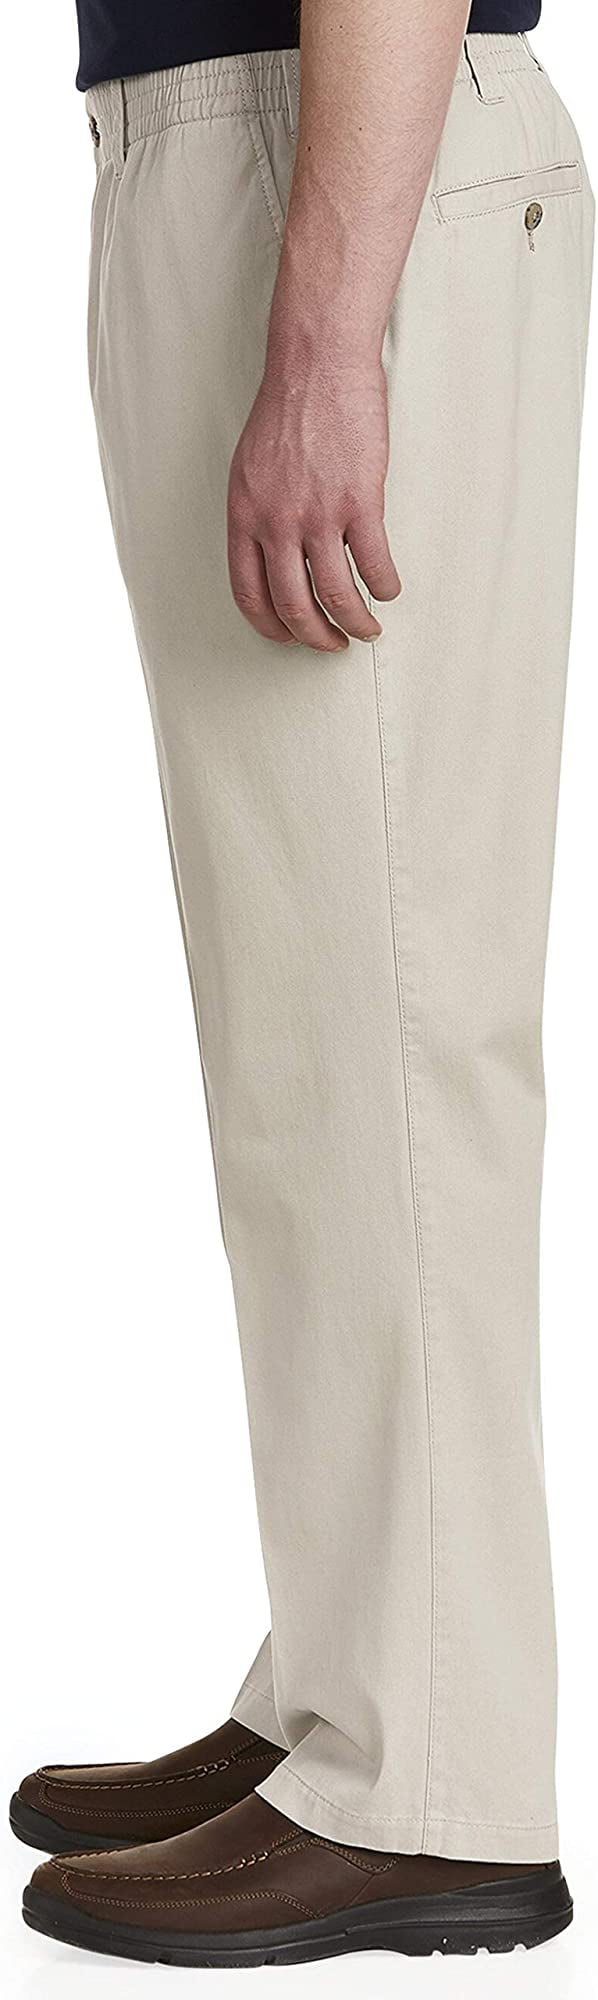 Harbor Bay by DXL Big and Tall Big and Tall Elastic-Waist Twill Pants 